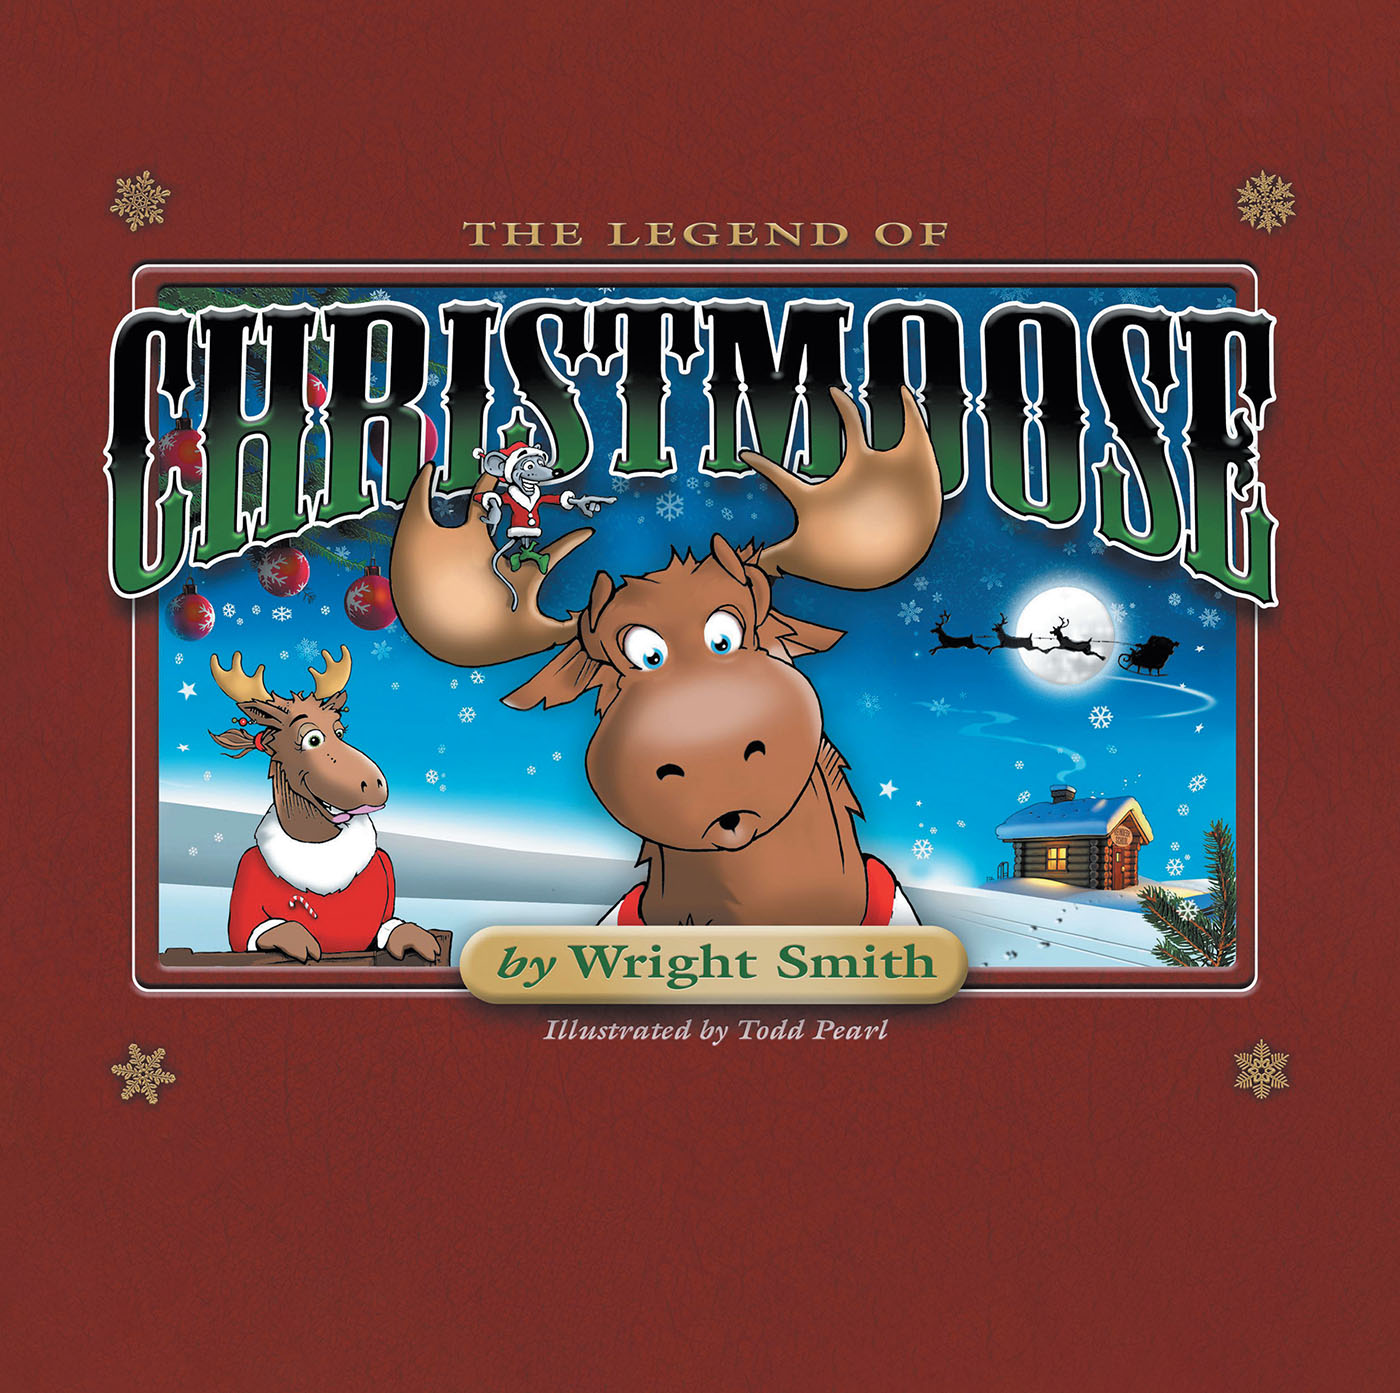 Author Wright Smith’s New Book, "The Legend of Christmoose," is a Delightful Story About a Moose That Wants to Become One of Santa’s Prized Reindeer